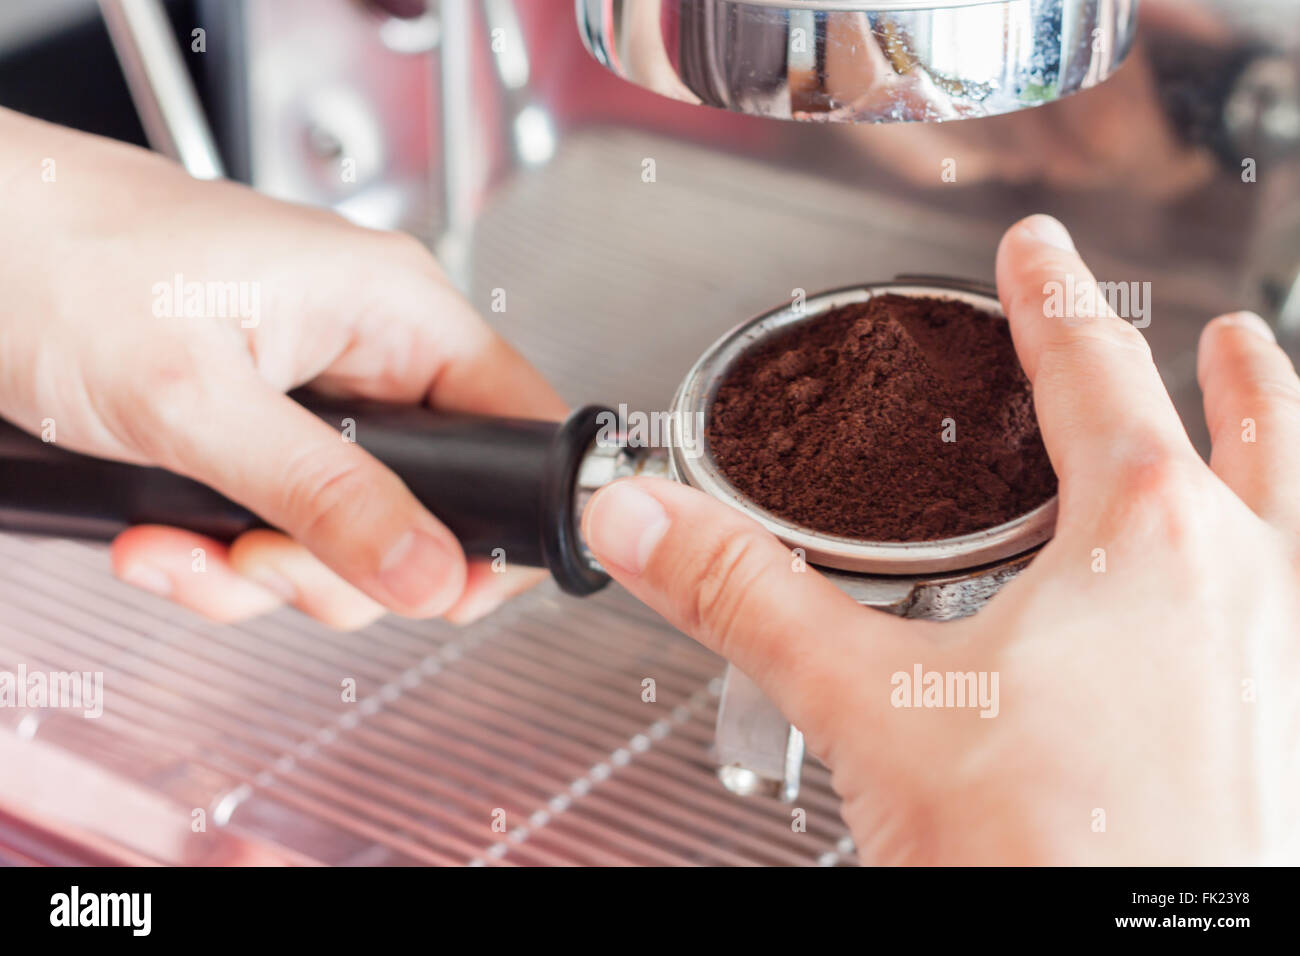 Woman's hand holding coffee grind in group with vintage style, stock photo Stock Photo